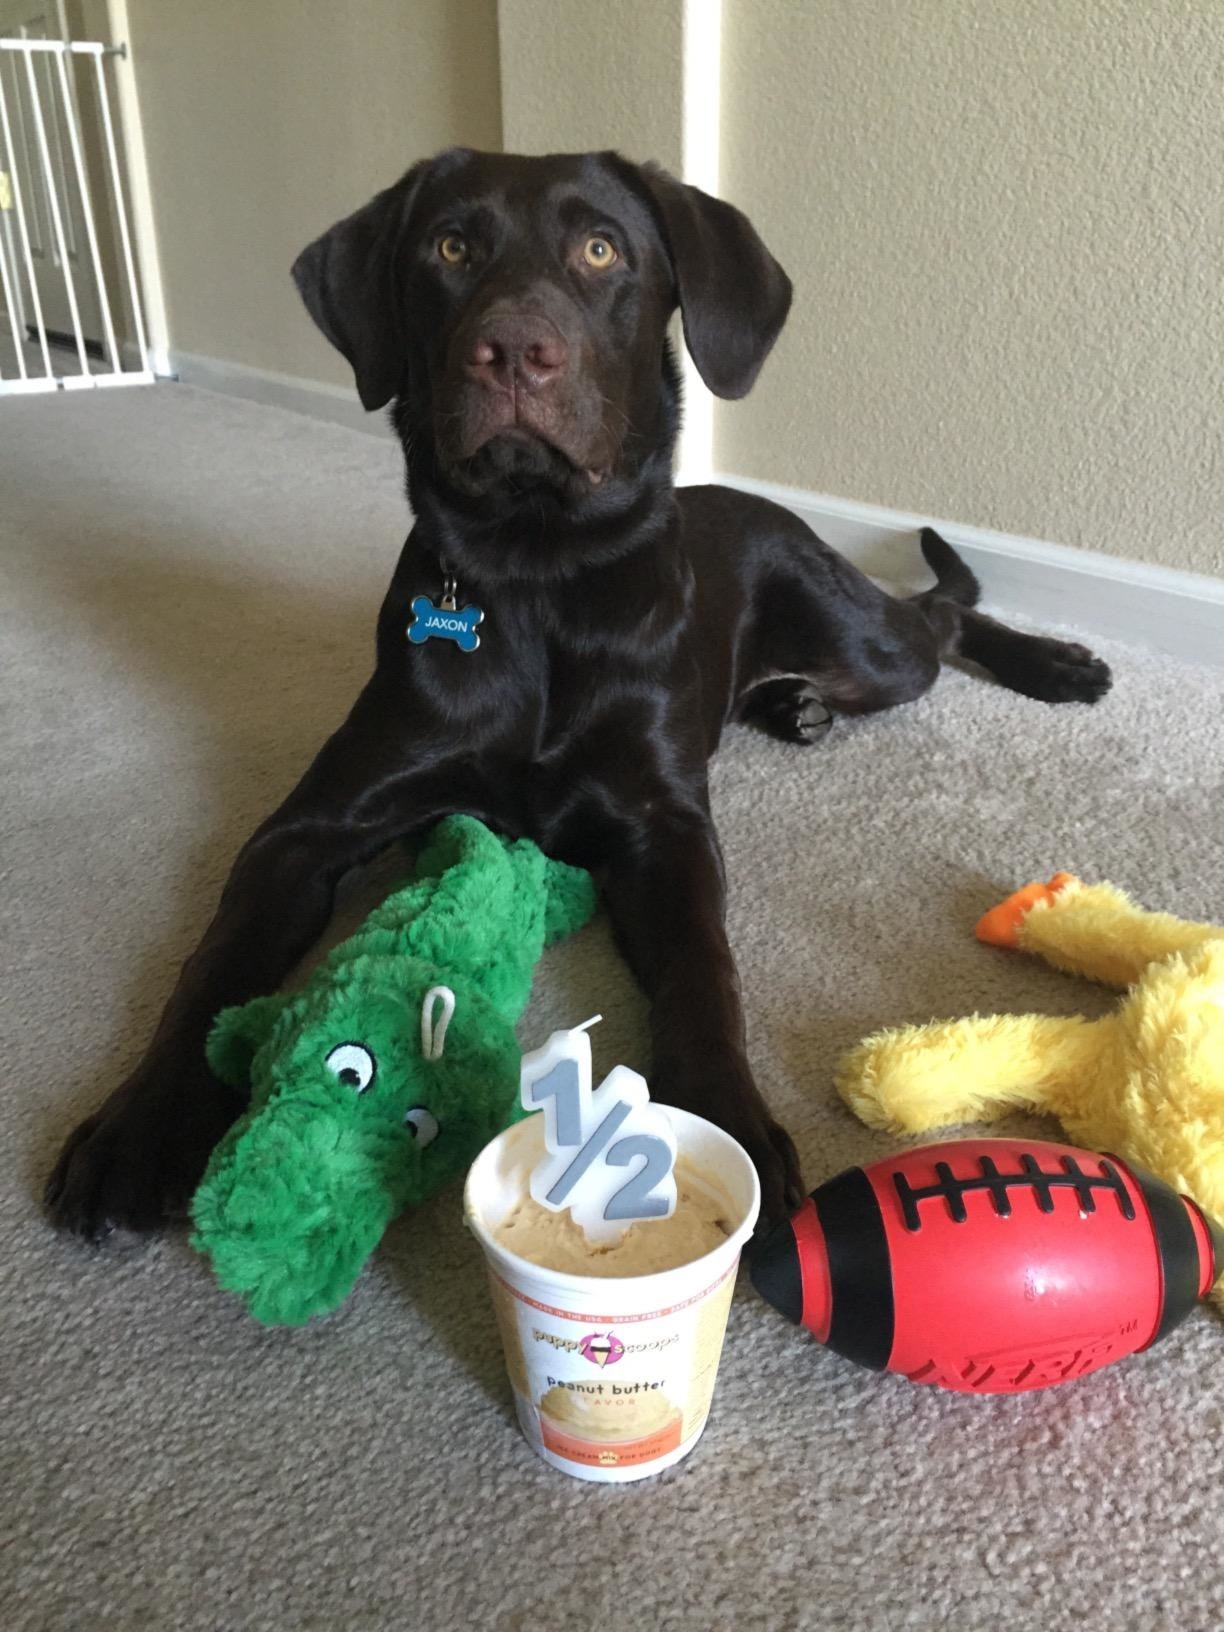 Reviewer photo of a chocolate lab sitting next to an ice cream pint with an unlit candle in it